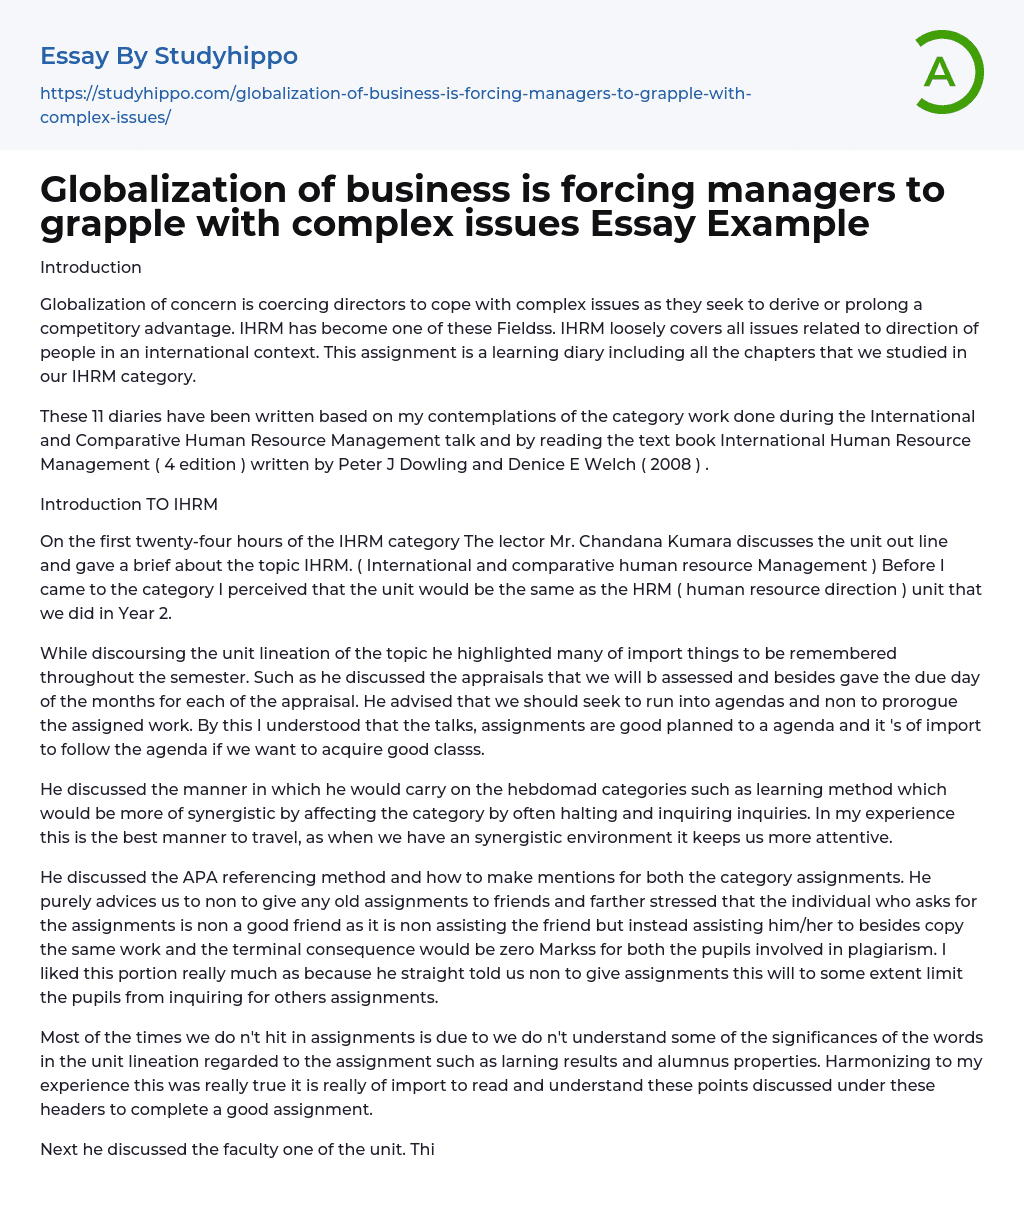 Globalization of business is forcing managers to grapple with complex issues Essay Example